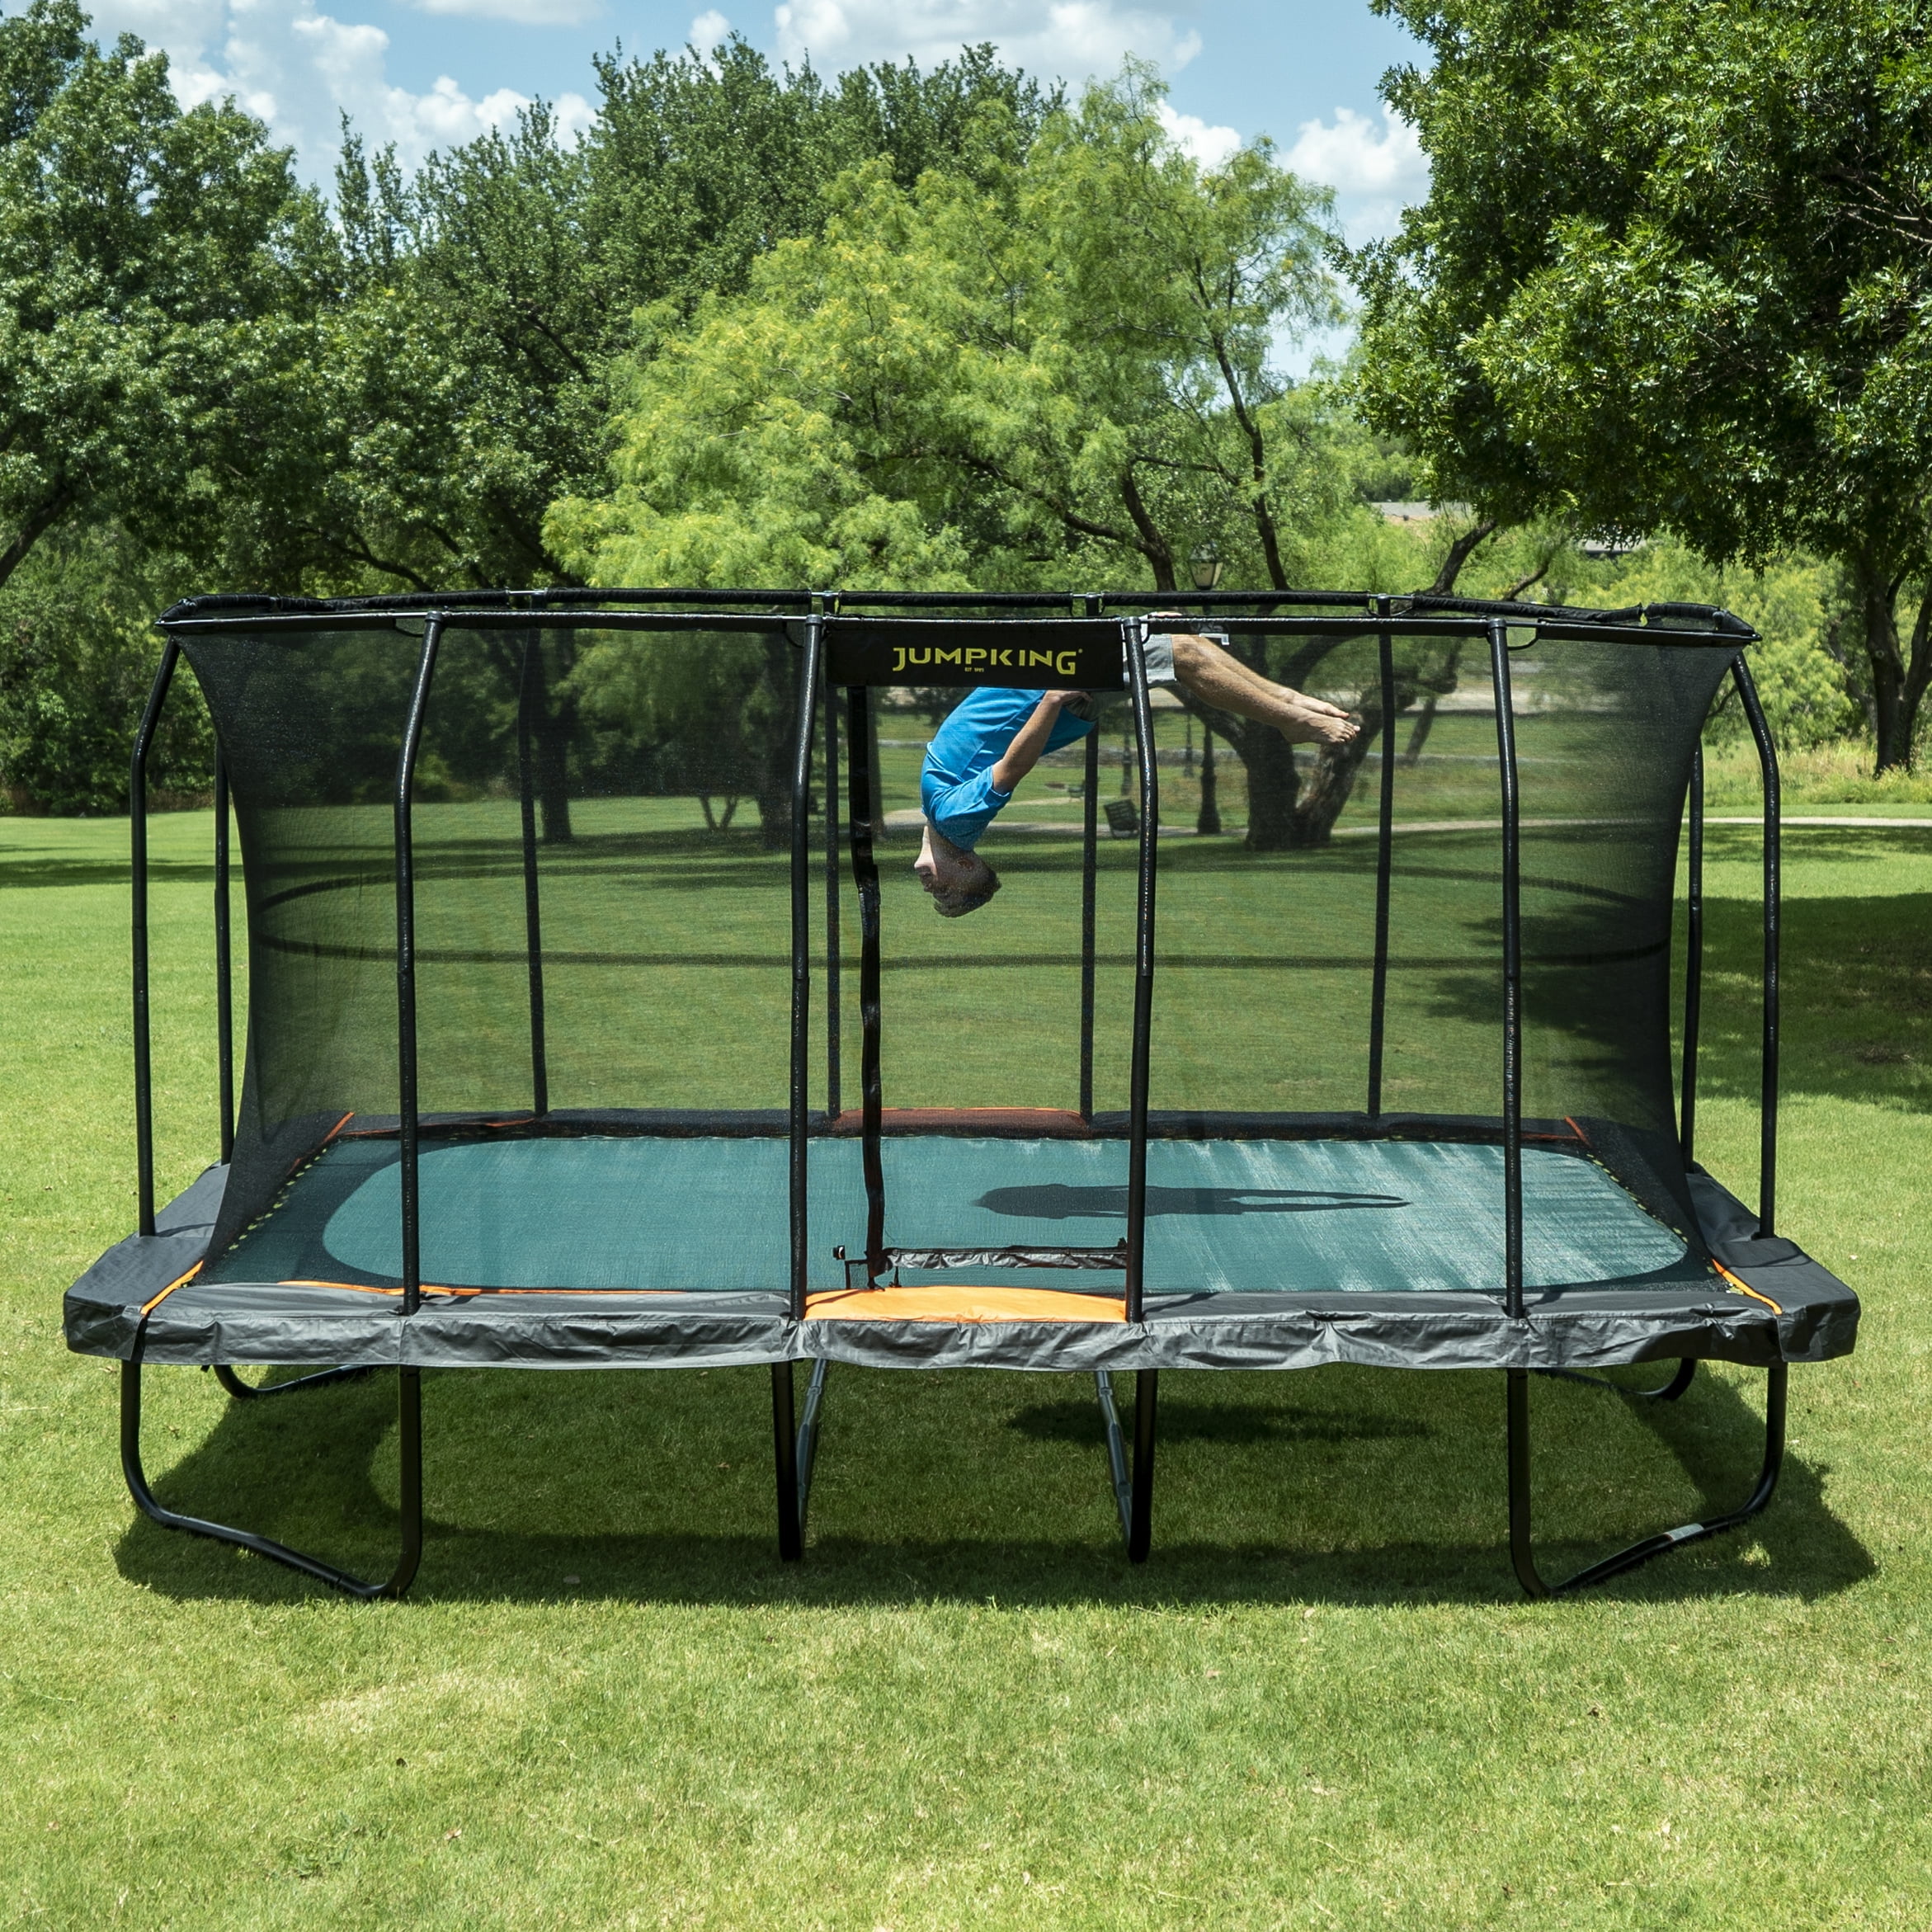 Jumpking ProSeries Rectangular Trampoline 10’ x 16’ - No Other Trampoline Can Compete: Double the Springs, Patented V-shaped Spring Arrangement, Comfort Weave Jumping Pad (Black/Orange) Box 1 of 3